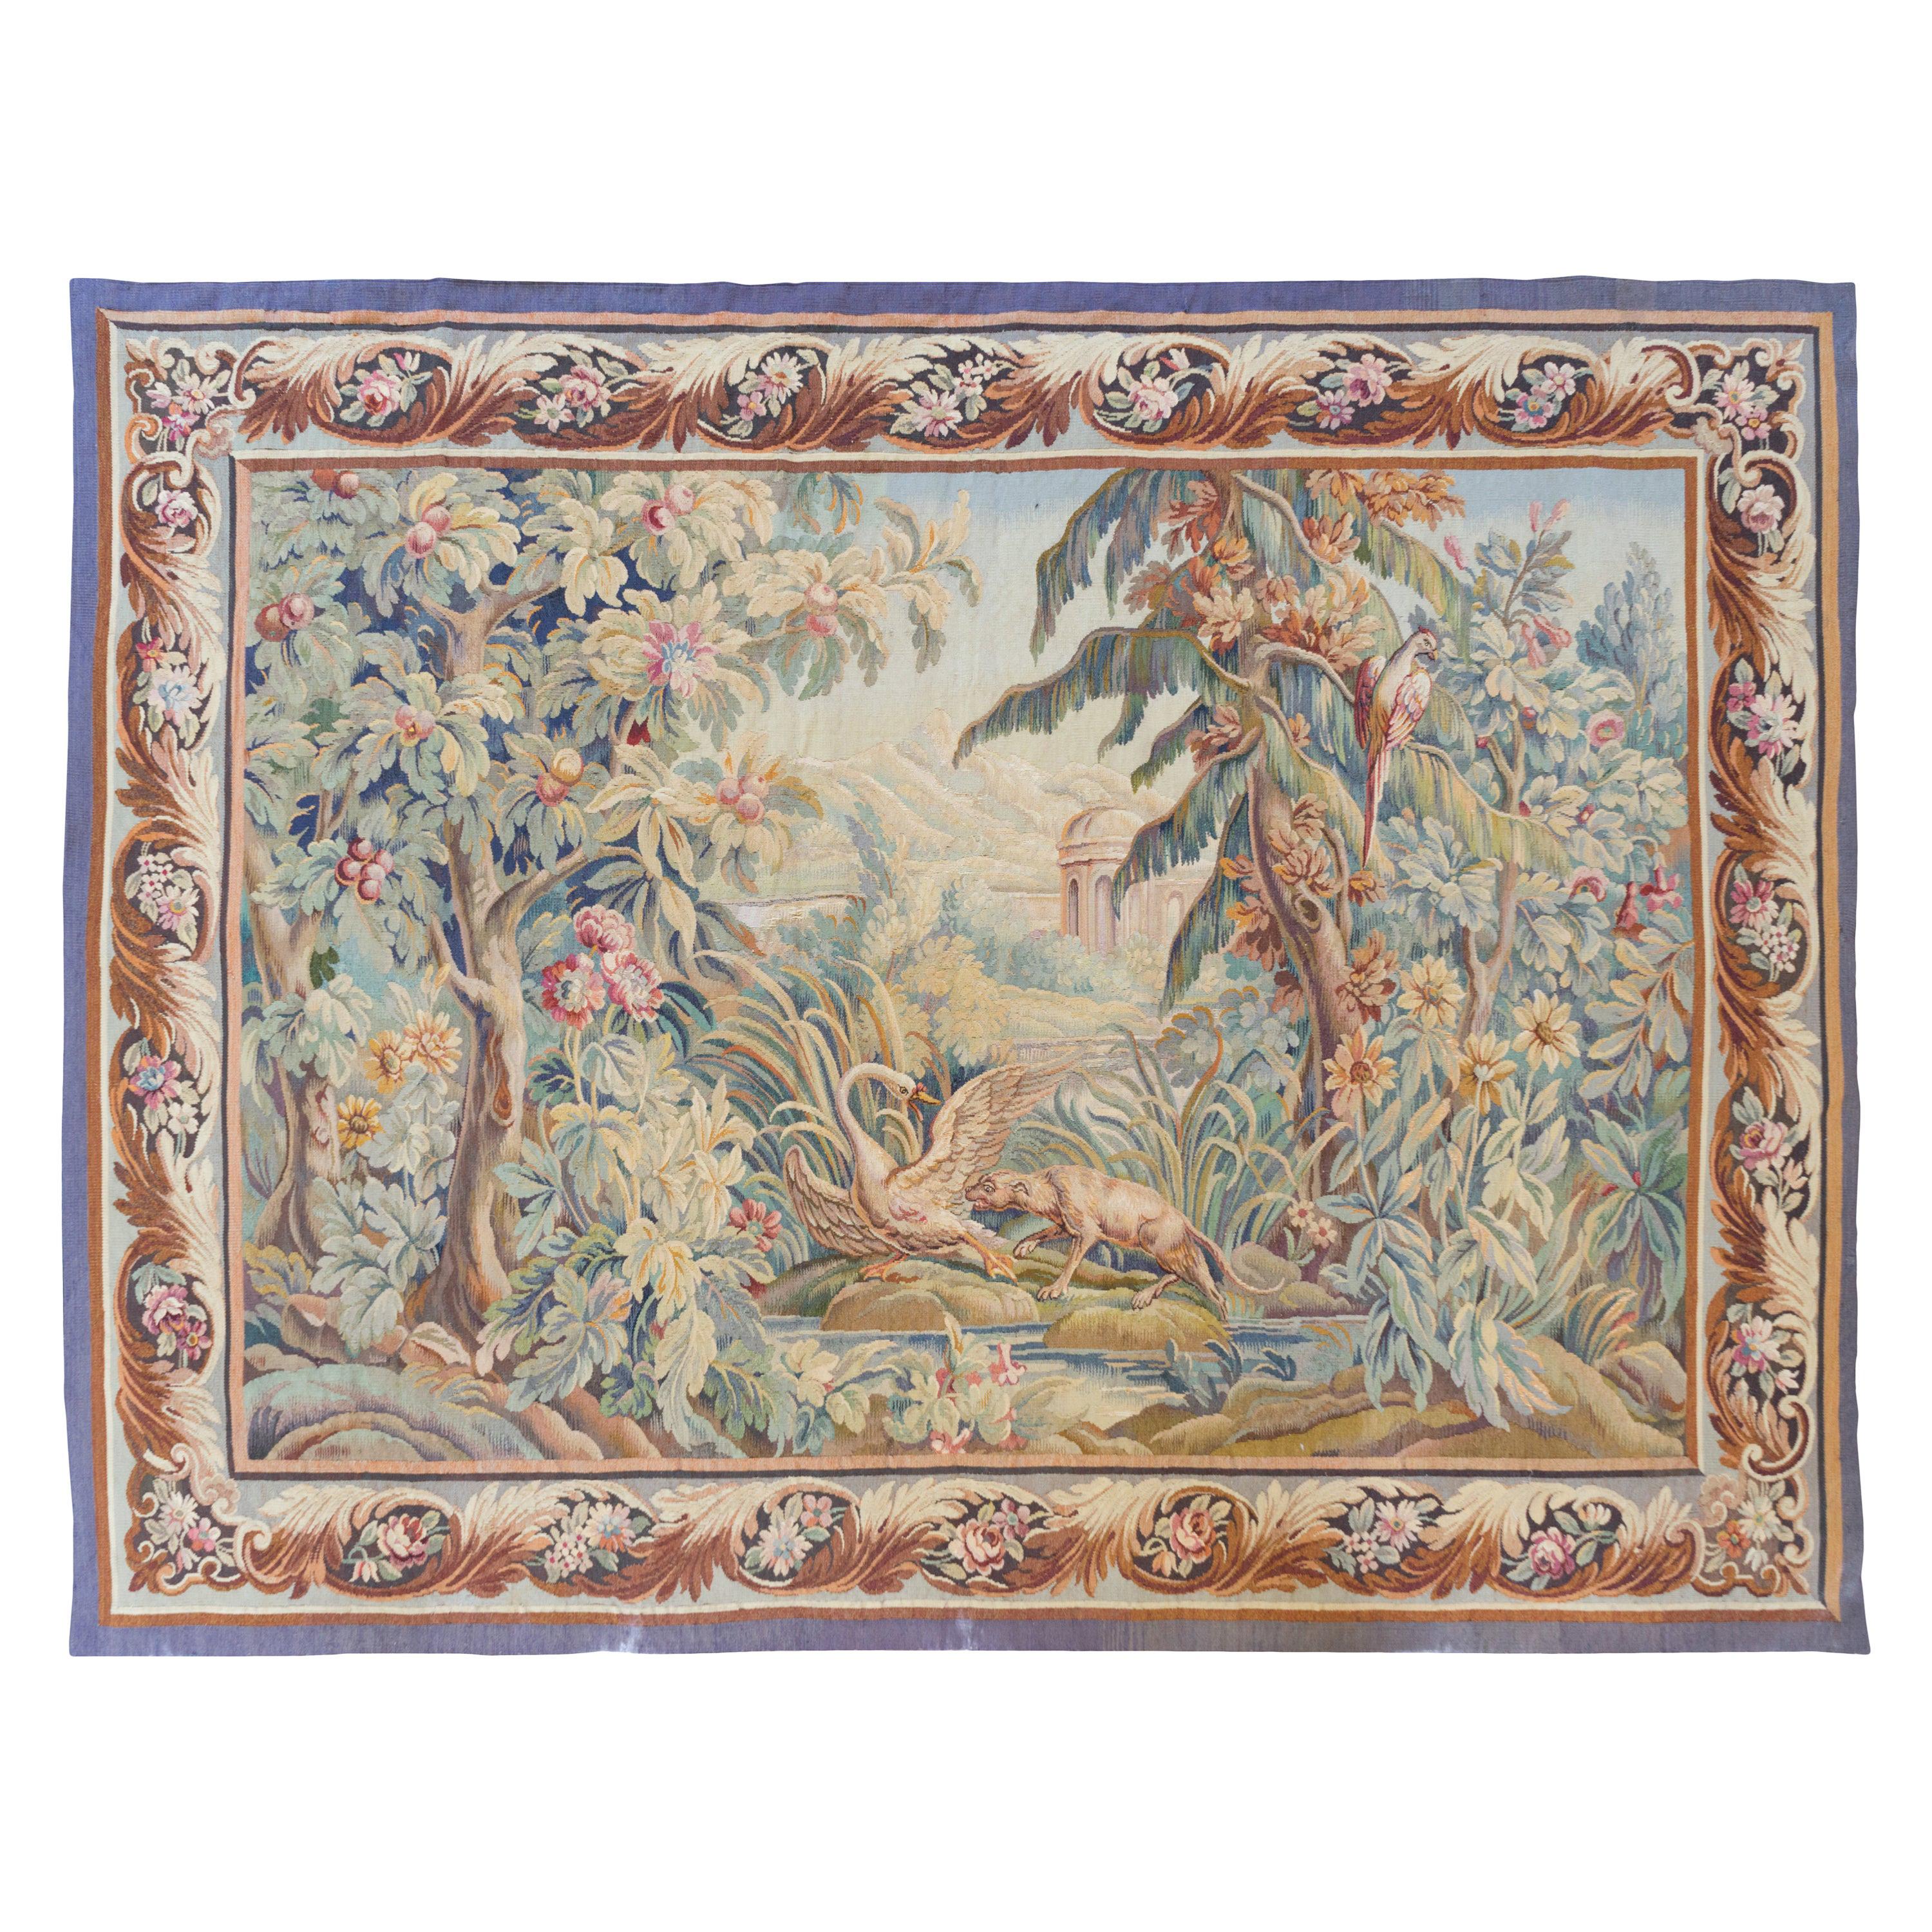 Antique 19th Century French Aubusson Landscape Tapestry with Swan